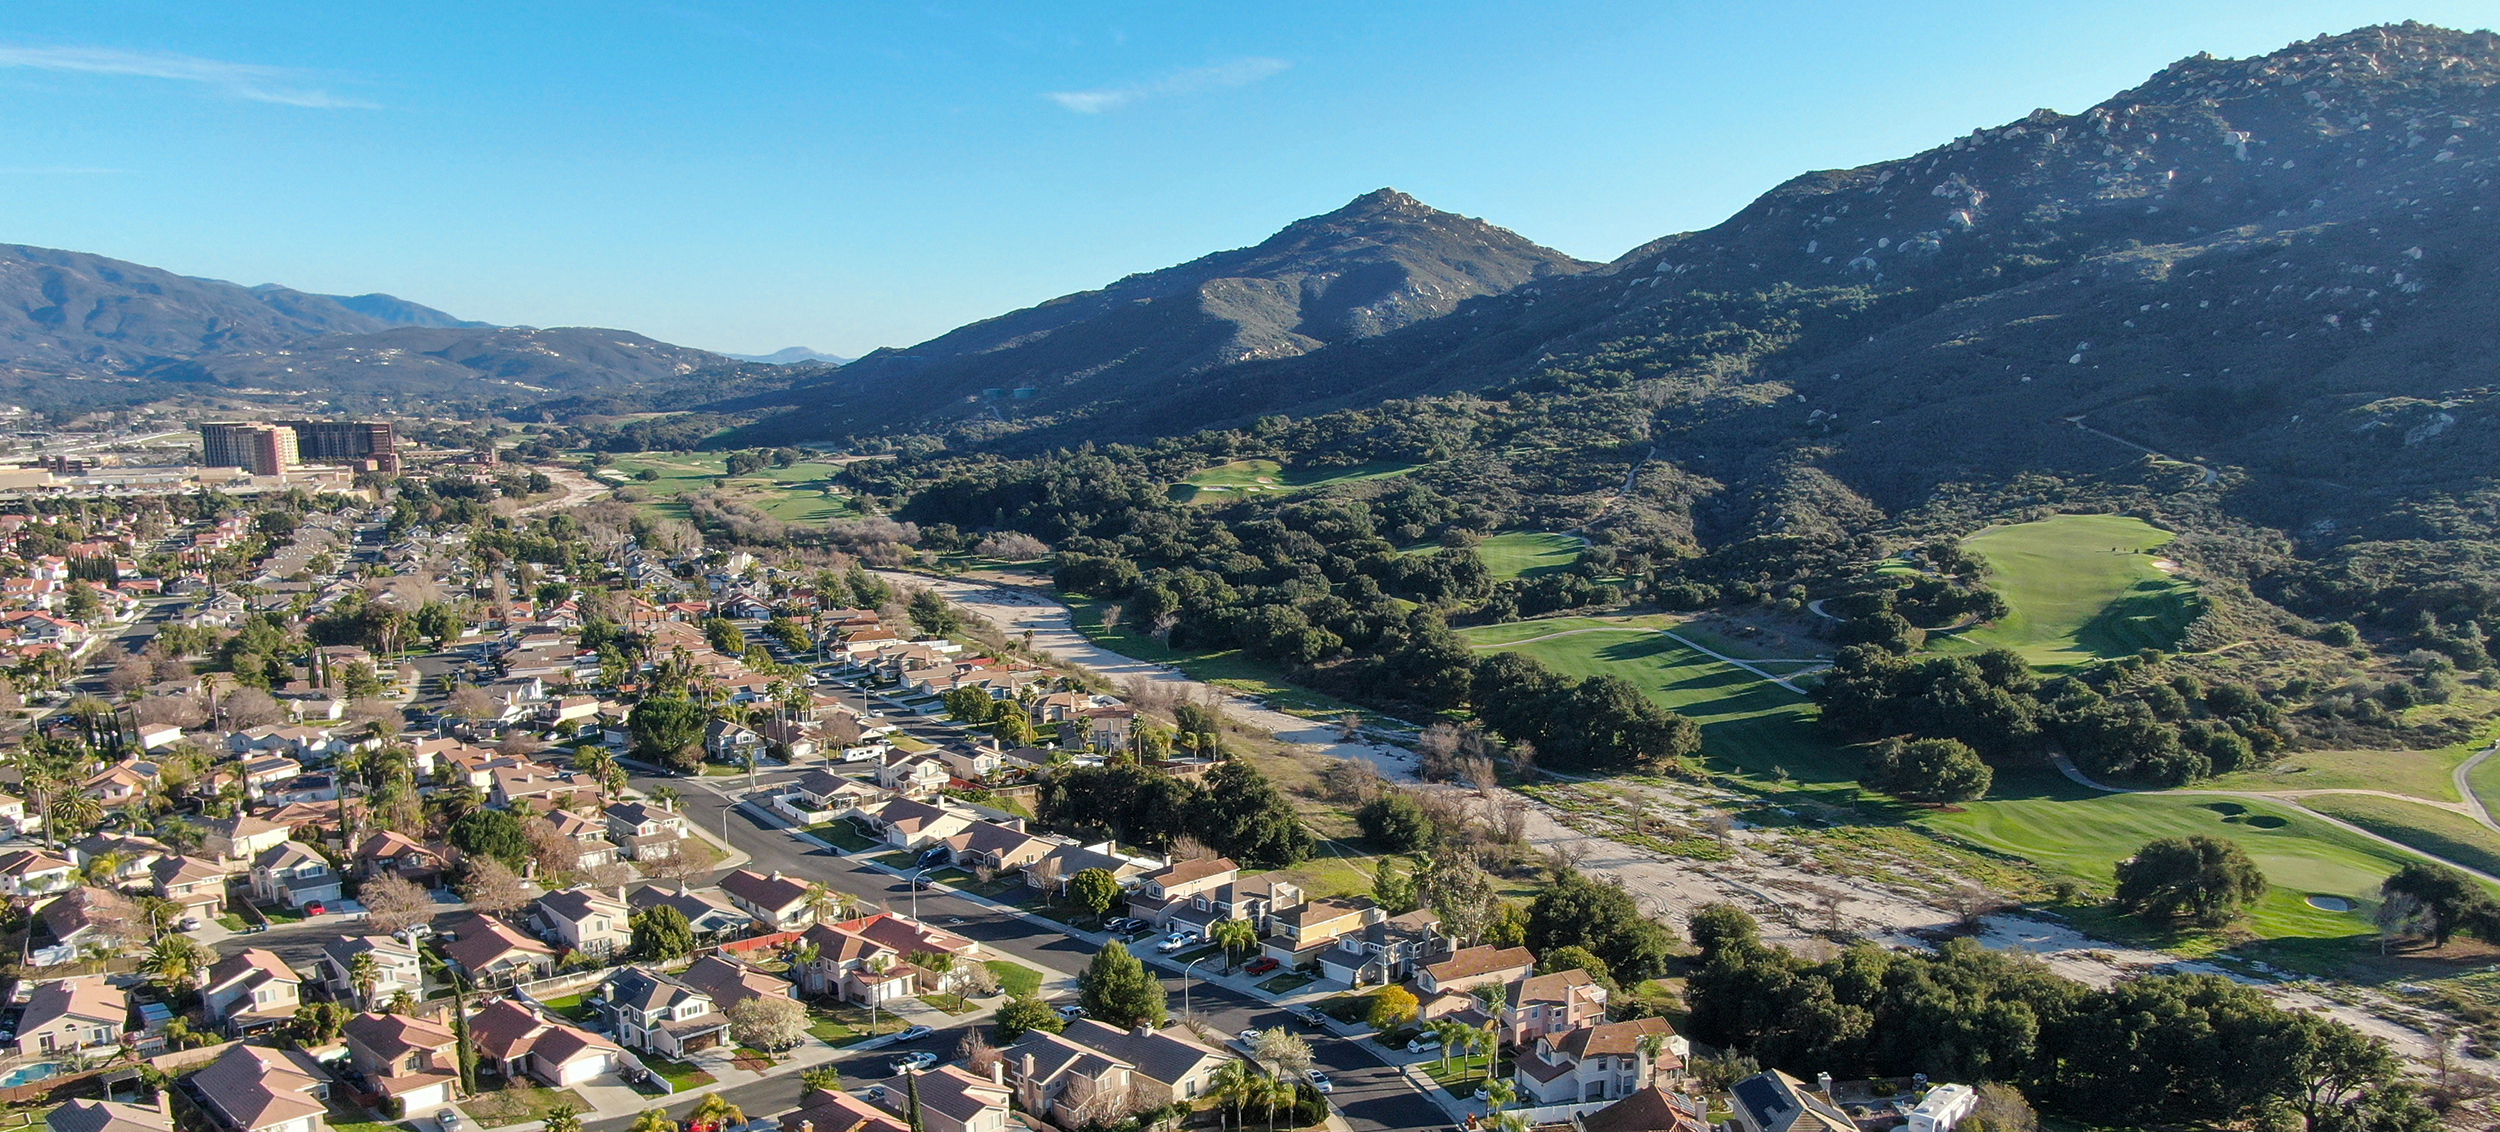 A drone shot of a California neighborhood, with potential to benefit from market transformation initiative development